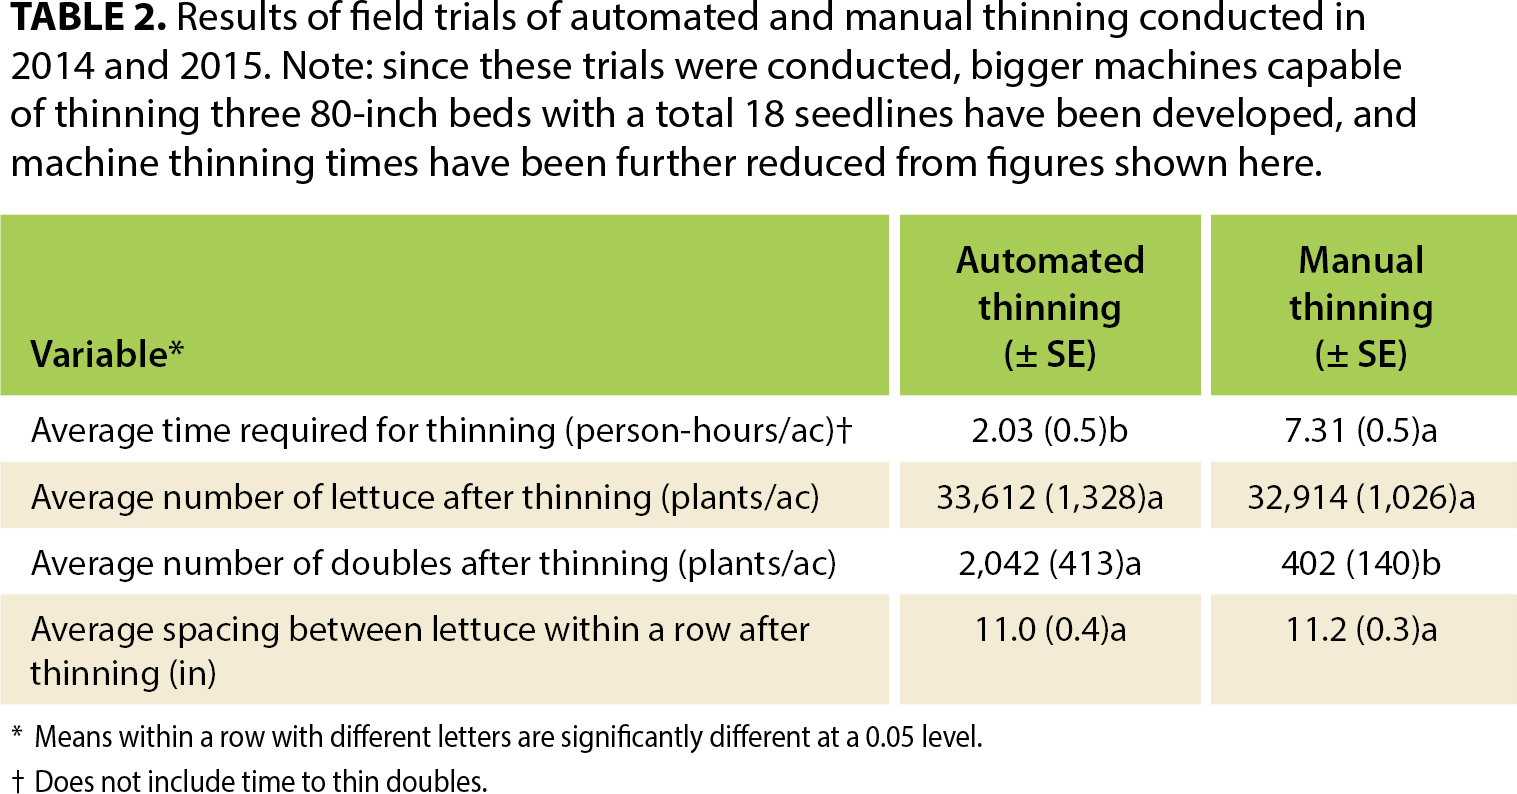 Results of field trials of automated and manual thinning conducted in 2014 and 2015. Note: since these trials were conducted, bigger machines capable of thinning three 80-inch beds with a total 18 seedlines have been developed, and machine thinning times have been further reduced from figures shown here.